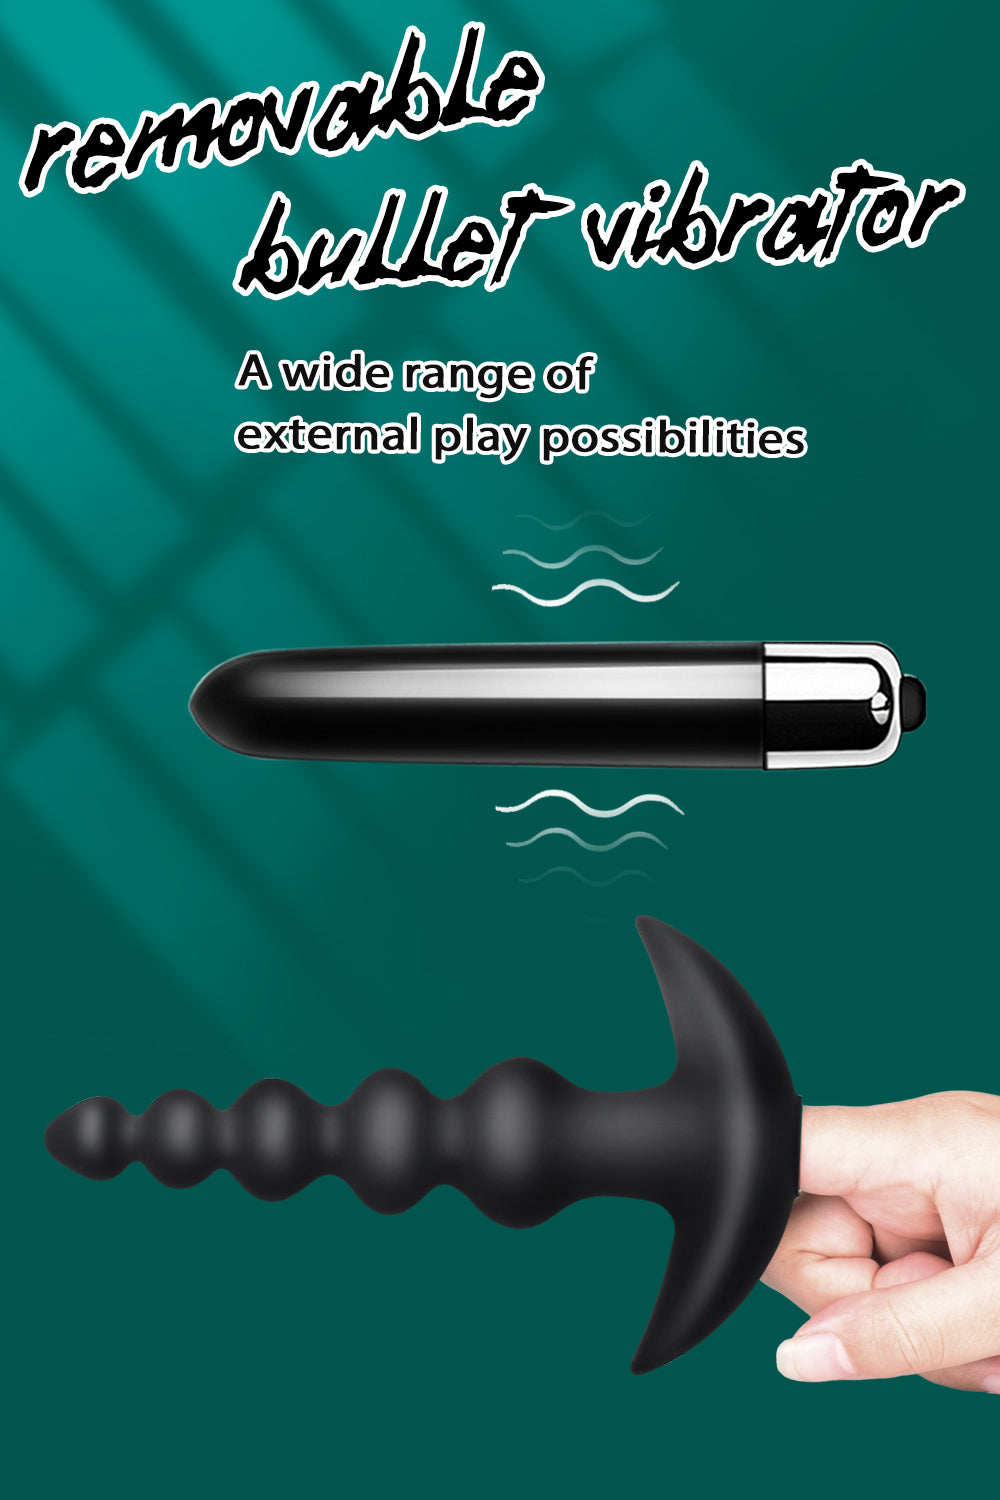 Anal Beads Toy,Areskey Vibrating Anal Beads Butt Plug - Flexible Silicone 16 Vibration Modes Graduated Design Anal Sex Toy Waterproof Bullet Vibrator for Men, Women and Couples